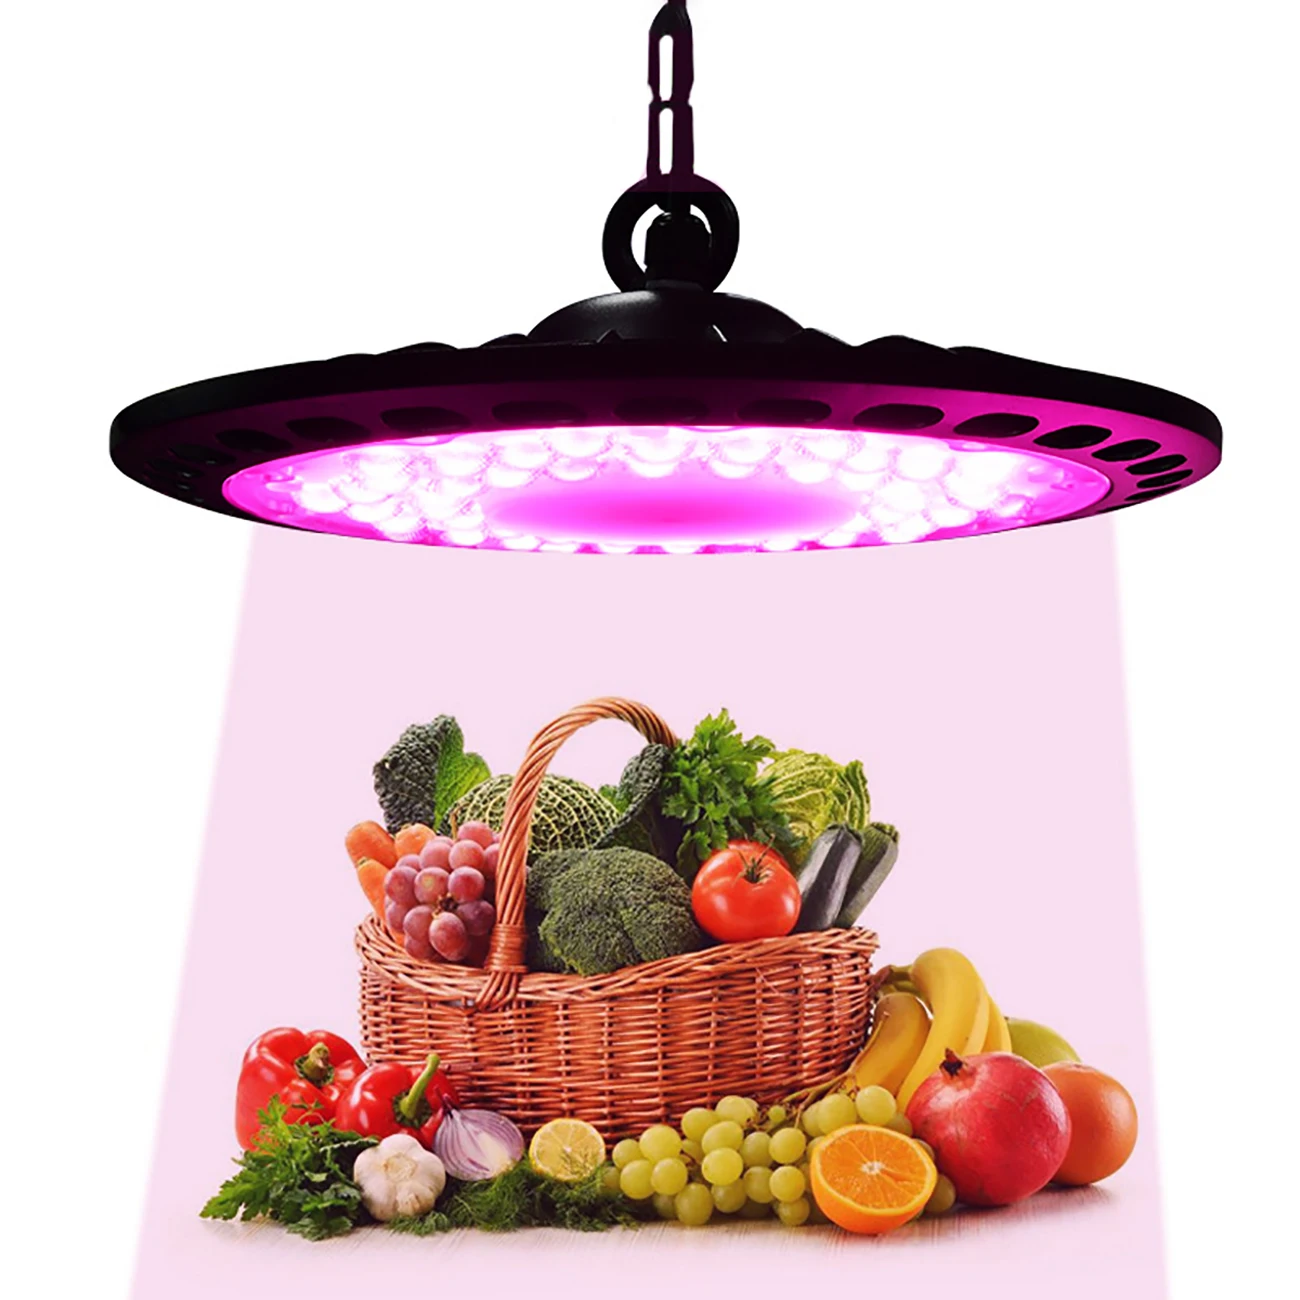 

LED Grow Light Phyto Lamp Full Spectrum Lamp Plants 100W 150W 200W UFO Waterproof Growth Lighting For Indoor Plant Greenhouse